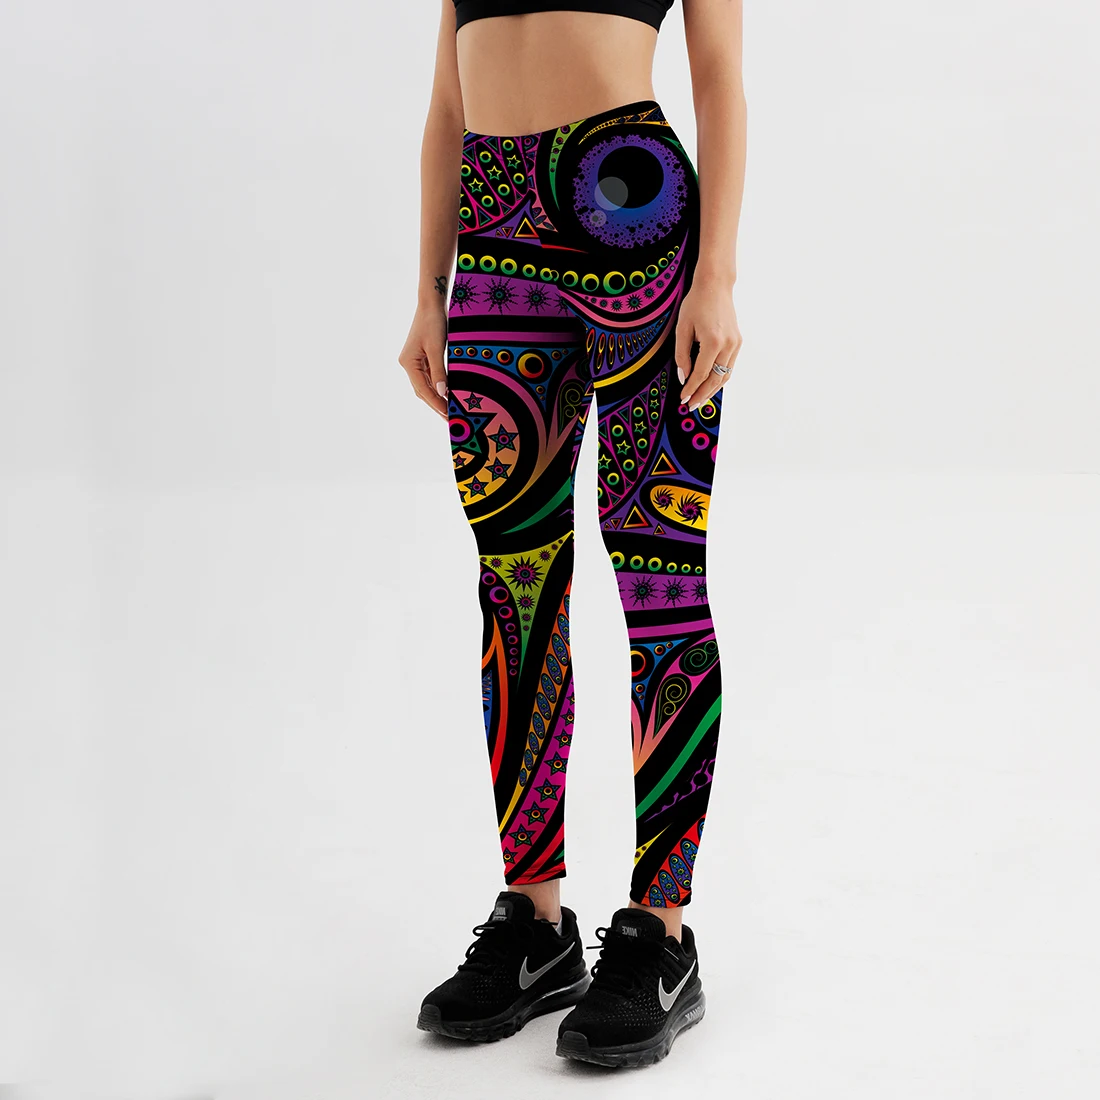 Women Summer Pants Color Totem Printed Black Sexy Leggings Plus Size Casual Street Wear High Waist Leggings scrunch leggings Leggings